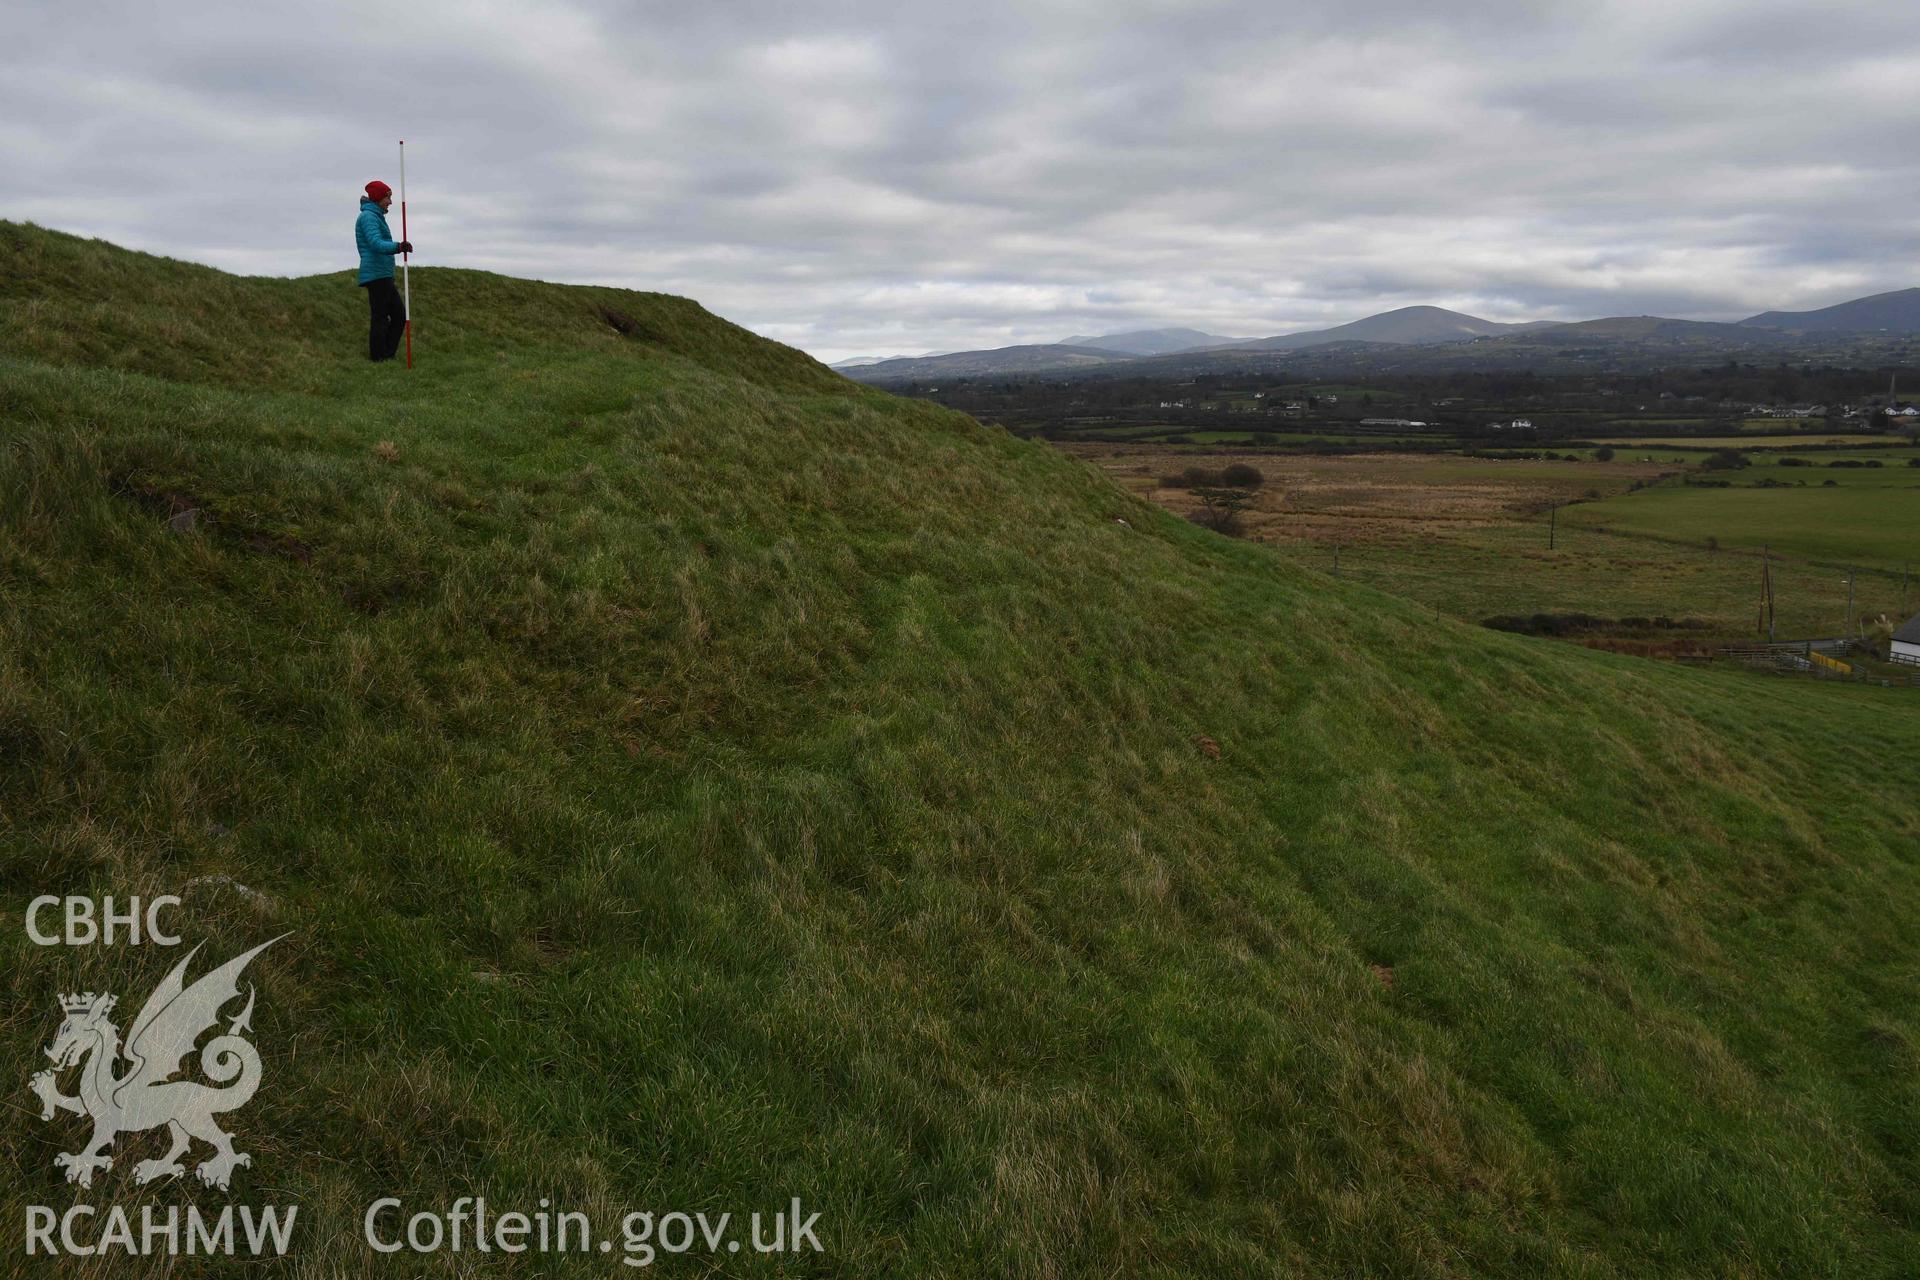 Southern ramparts with figure and 2m scale. Taken by Hannah Genders Boyd. Produced with EU funds through the Ireland Wales Co-operation Programme 2014-2023. All material made freely available through the Open Government Licence.